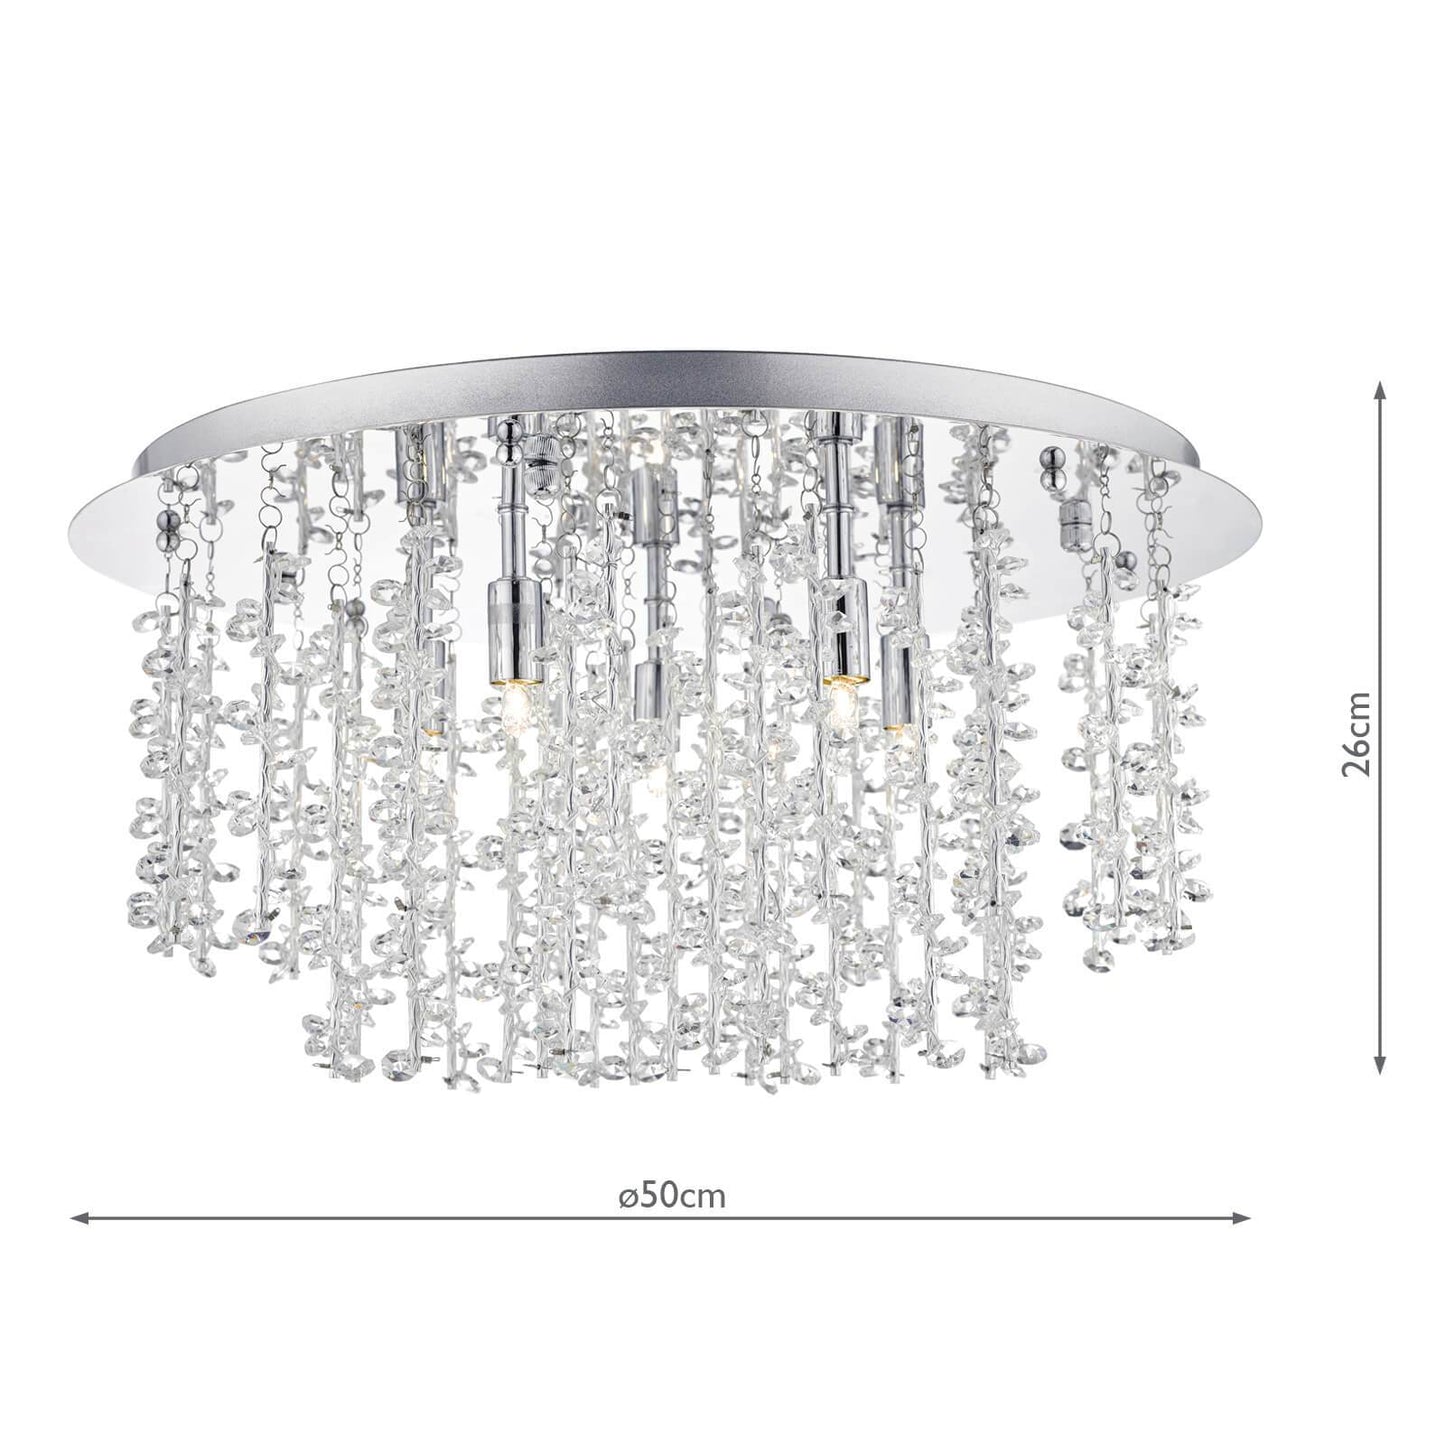 Oakleigh Polished Chrome & Crystal 5 Lamp Flush Ceiling Light - ID 5814 limited stock